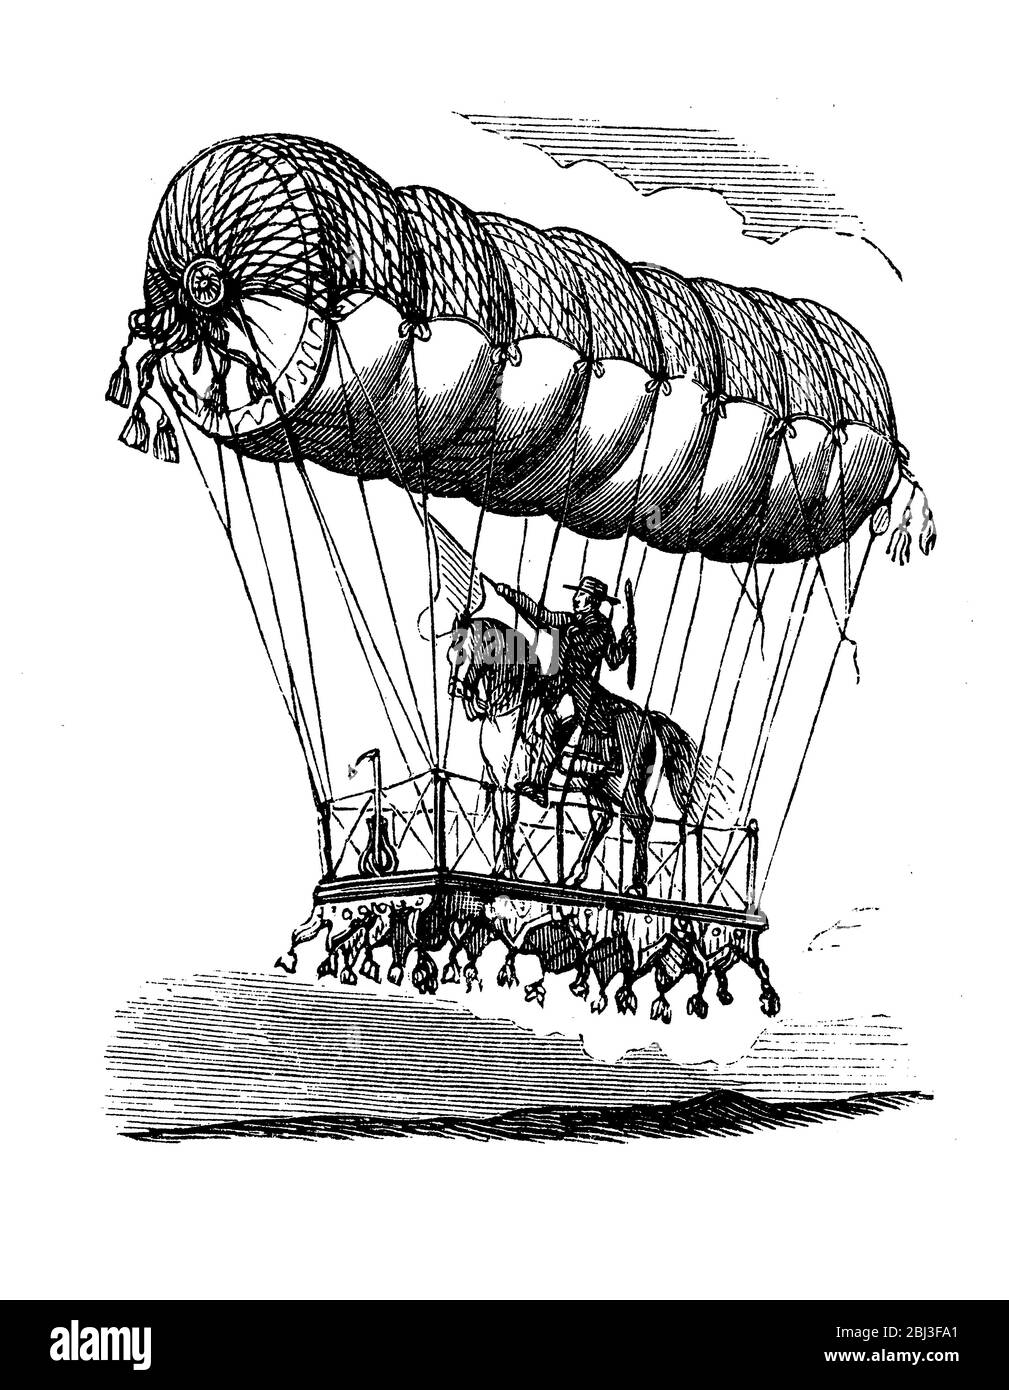 Pierre-Charles Tetu-Brissy (1770-1829) balloonist made a spectacular ascension equestrian horseback on his horse at the park of Chateau de Bellevue in 1798 suspending a heavy platform beneath his balloon Stock Photo